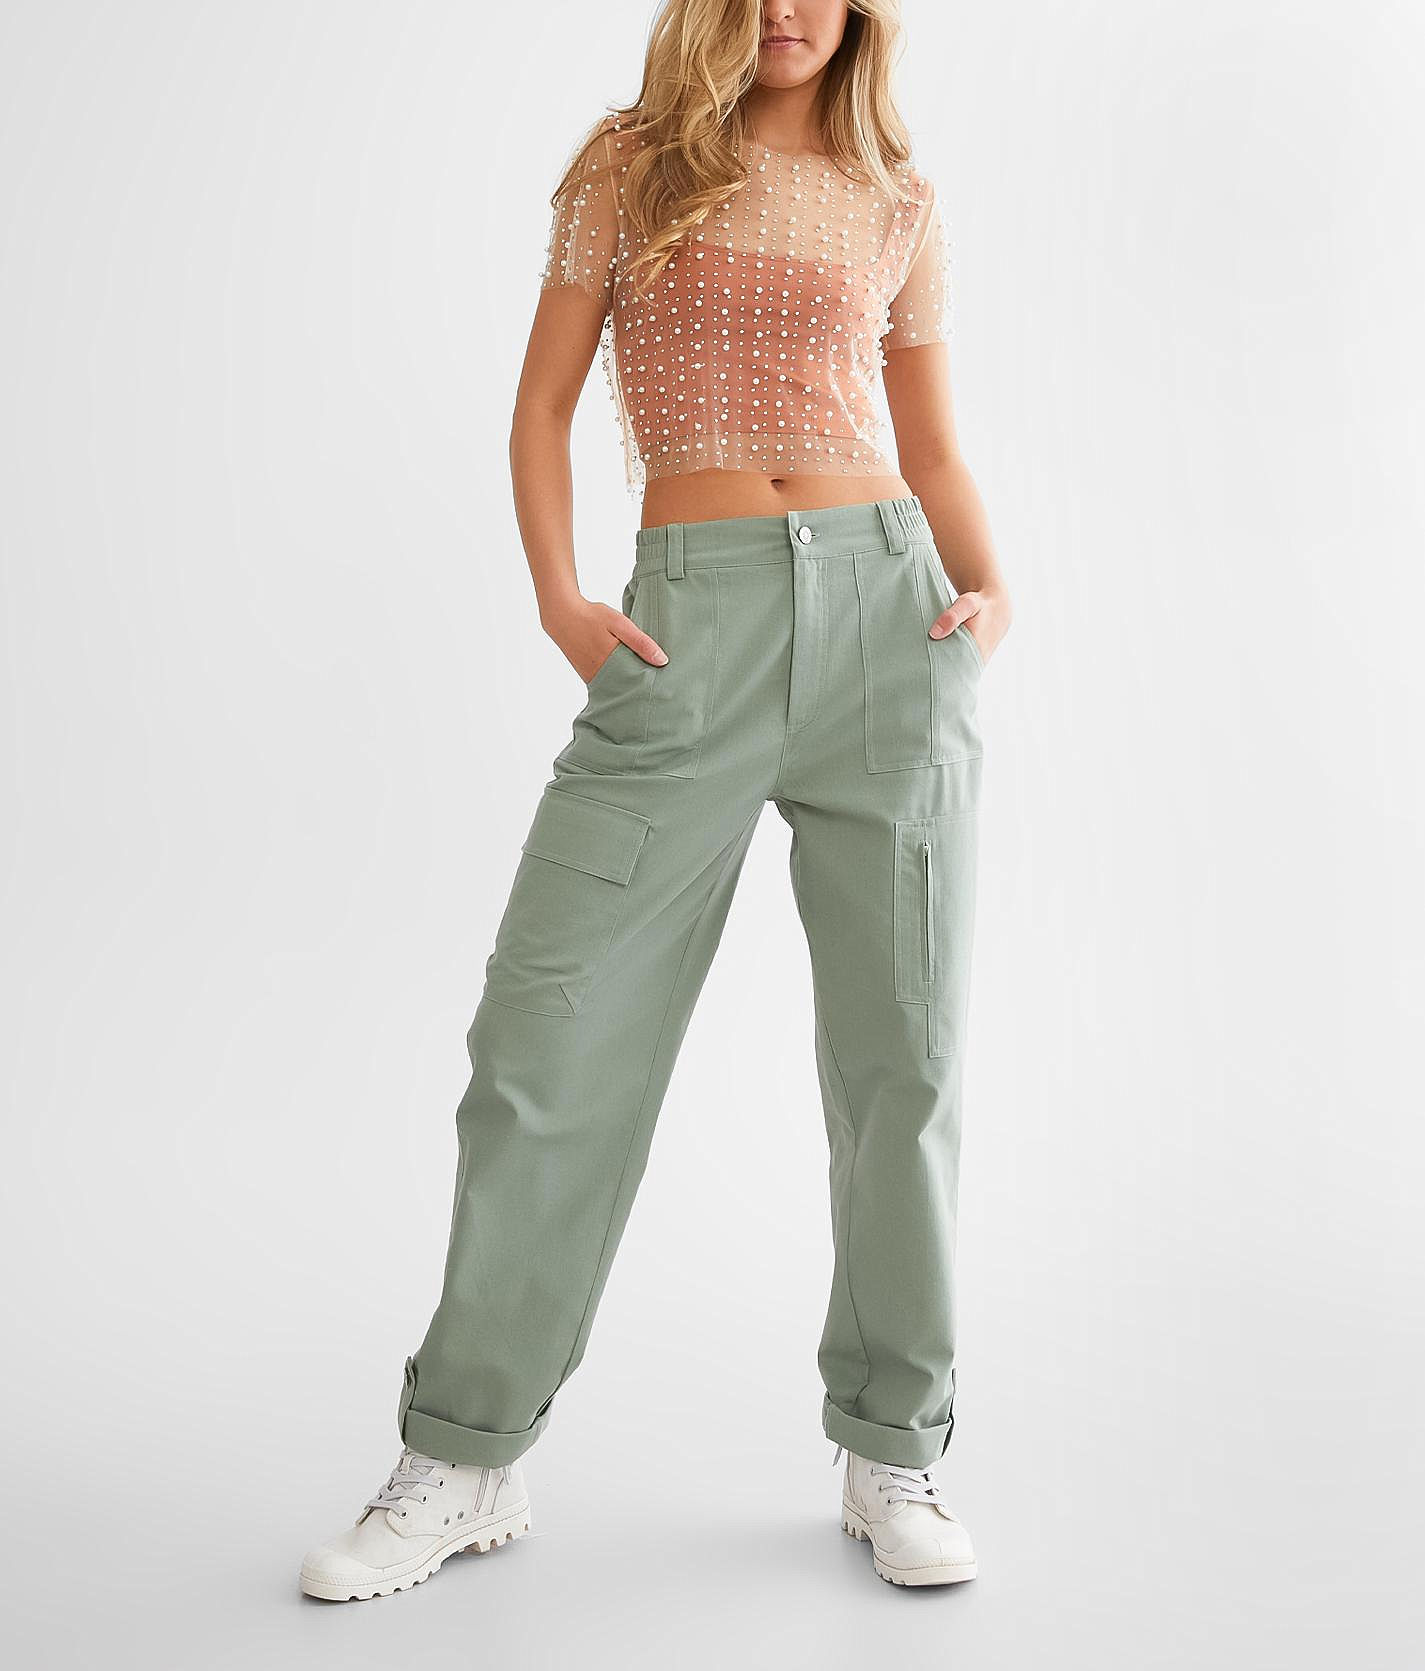 A. Peach Straight Leg Cargo Stretch Pant - Women's Pants in Sage Green